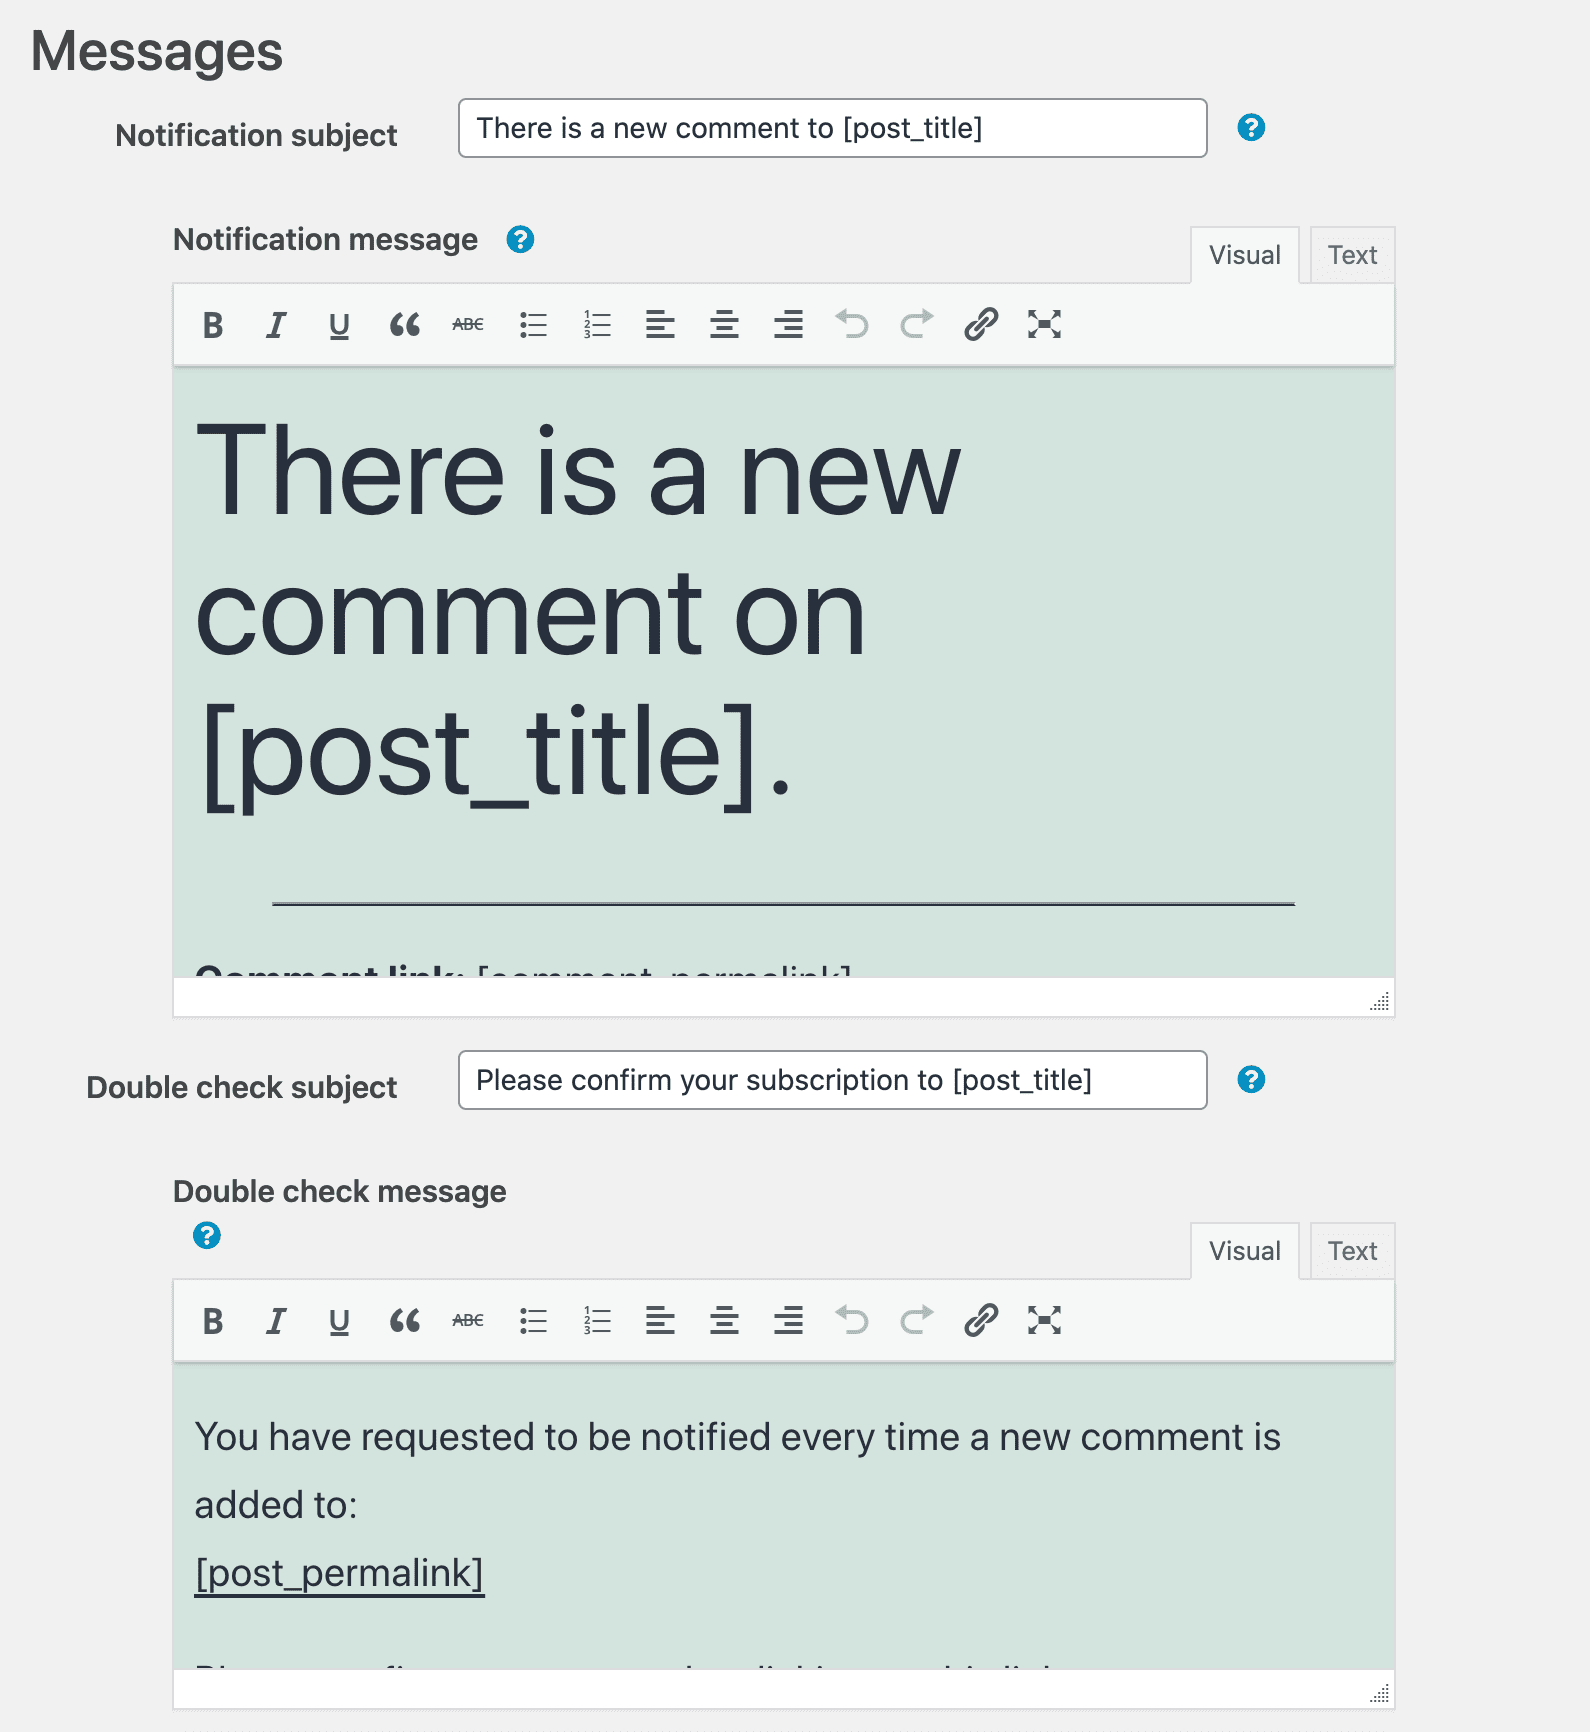 Customizing the comment subscription emails.